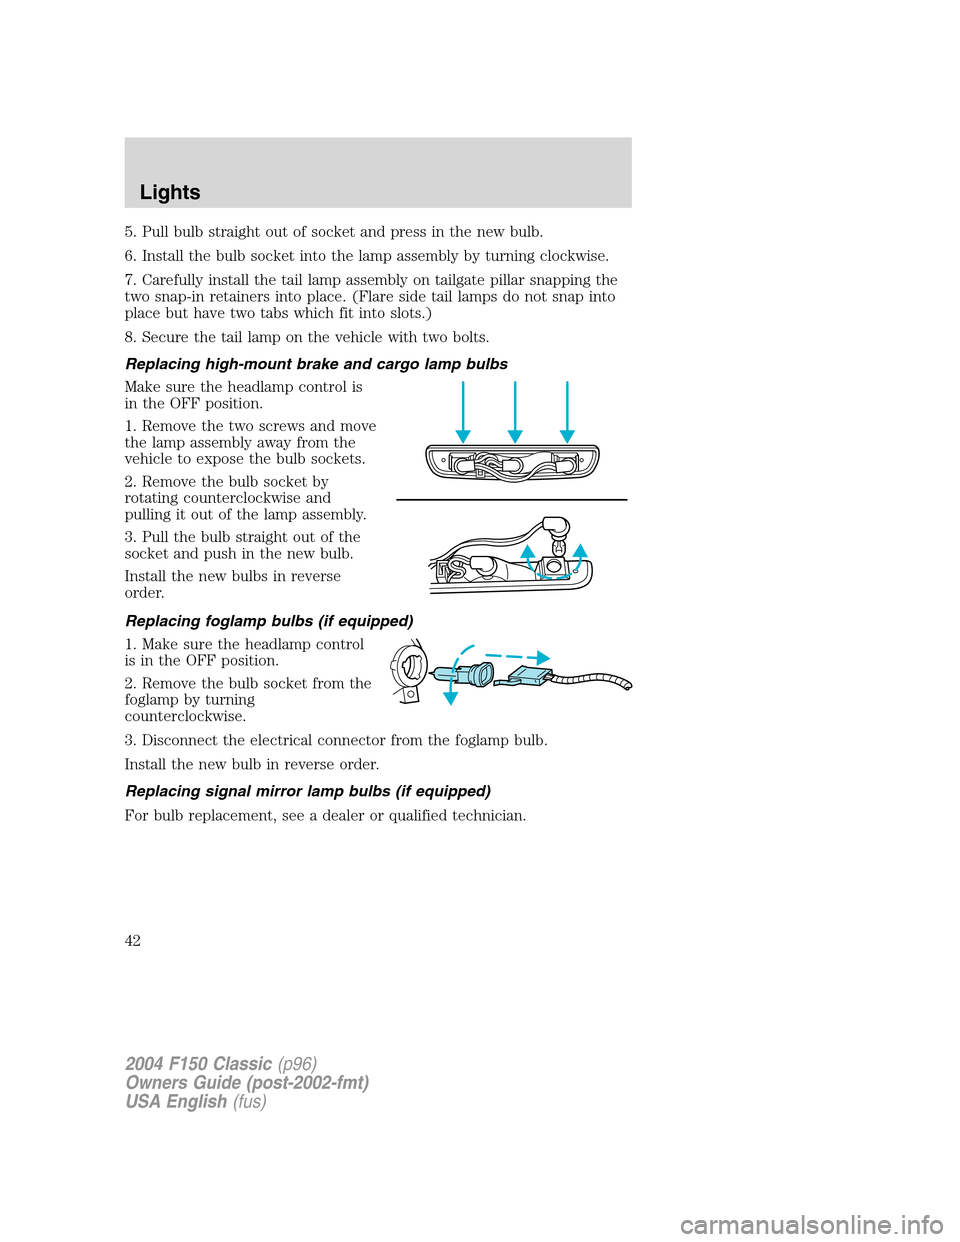 FORD F150 2004 11.G Herritage Owners Manual 5. Pull bulb straight out of socket and press in the new bulb.
6. Install the bulb socket into the lamp assembly by turning clockwise.
7. Carefully install the tail lamp assembly on tailgate pillar sn